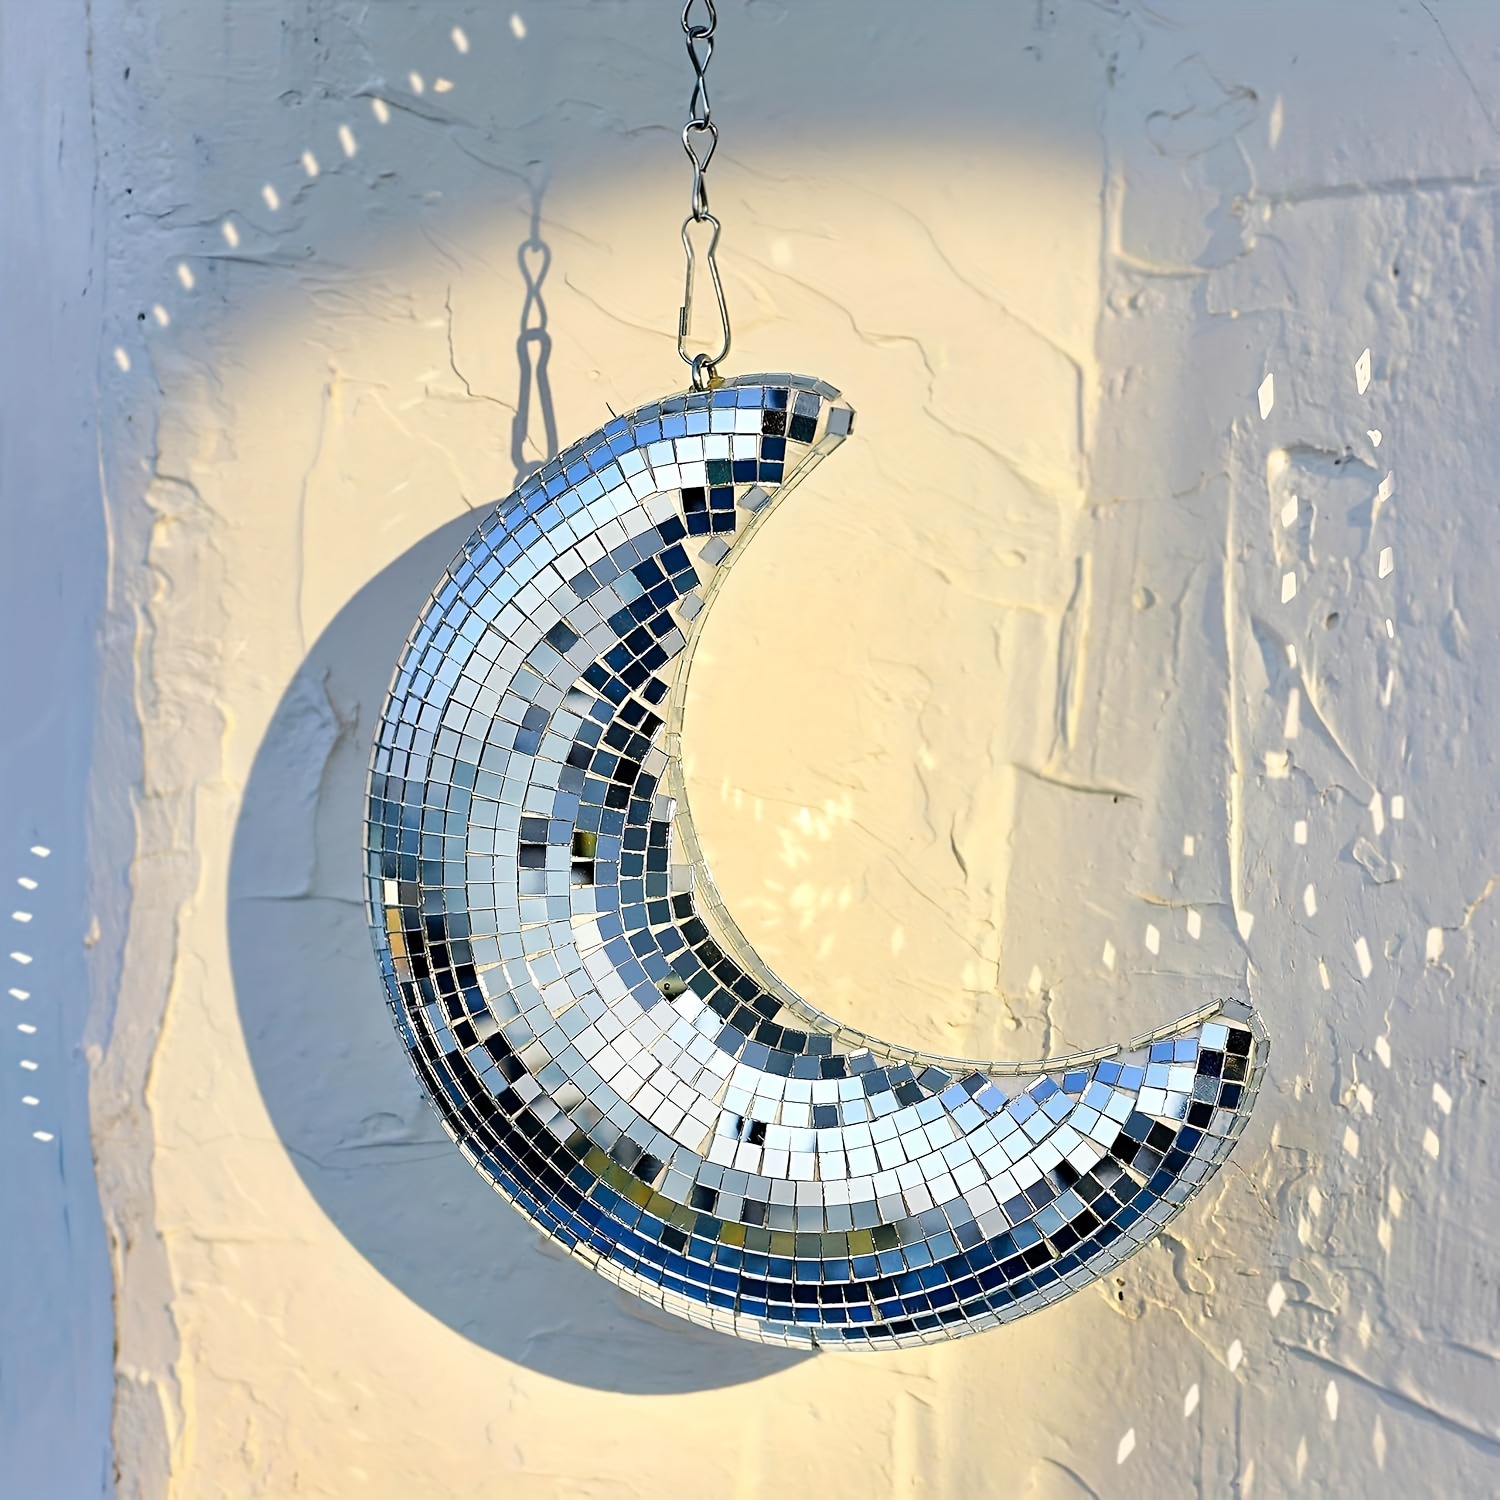 

1pc, Hanging Disco Ball Moon Shaped Disco Ball Silver Stage Mirror Balls Funky Home Decor For Christmas Tree, Party, Room, Courtyard, Handmade Retro Mirror Ball